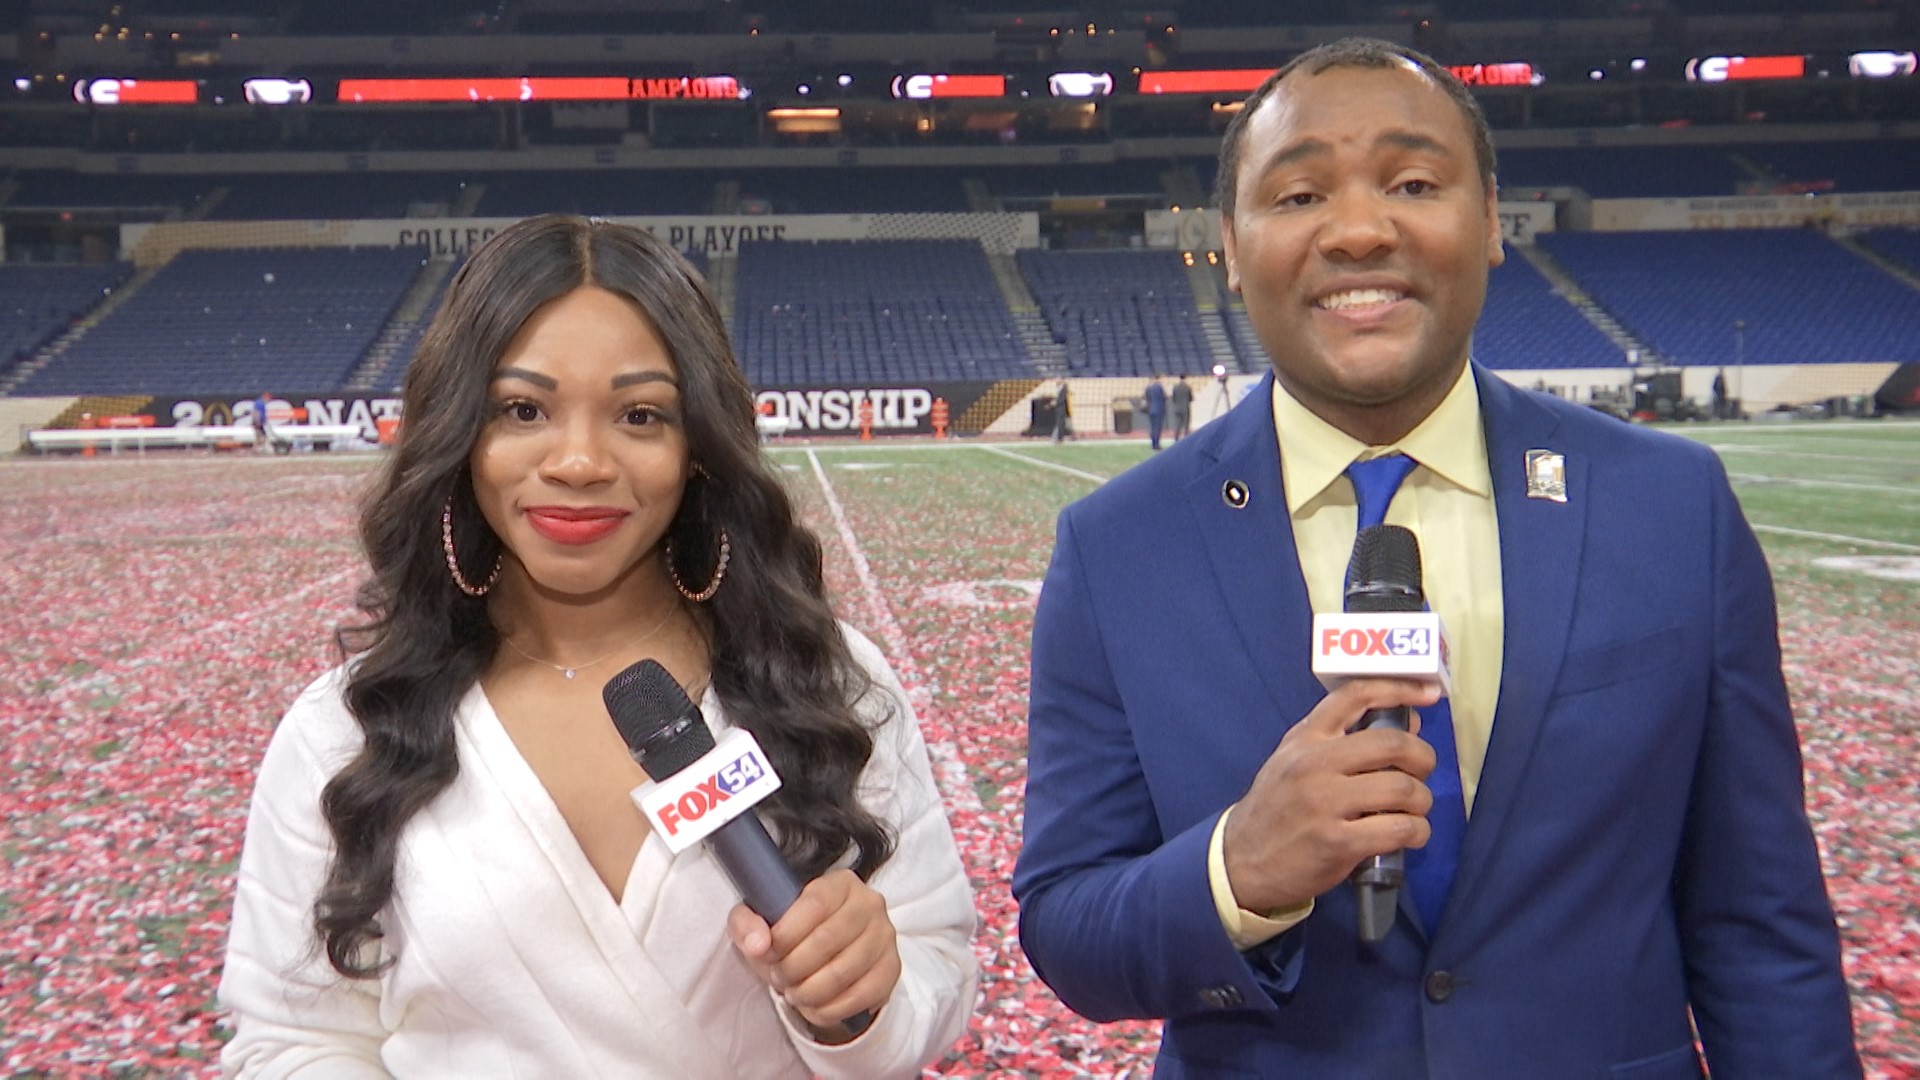 Georgia won their first national championship in four decades by defeating Alabama, 33-18 in the CFP National Championship. Mo & Naomi provided a postgame recap